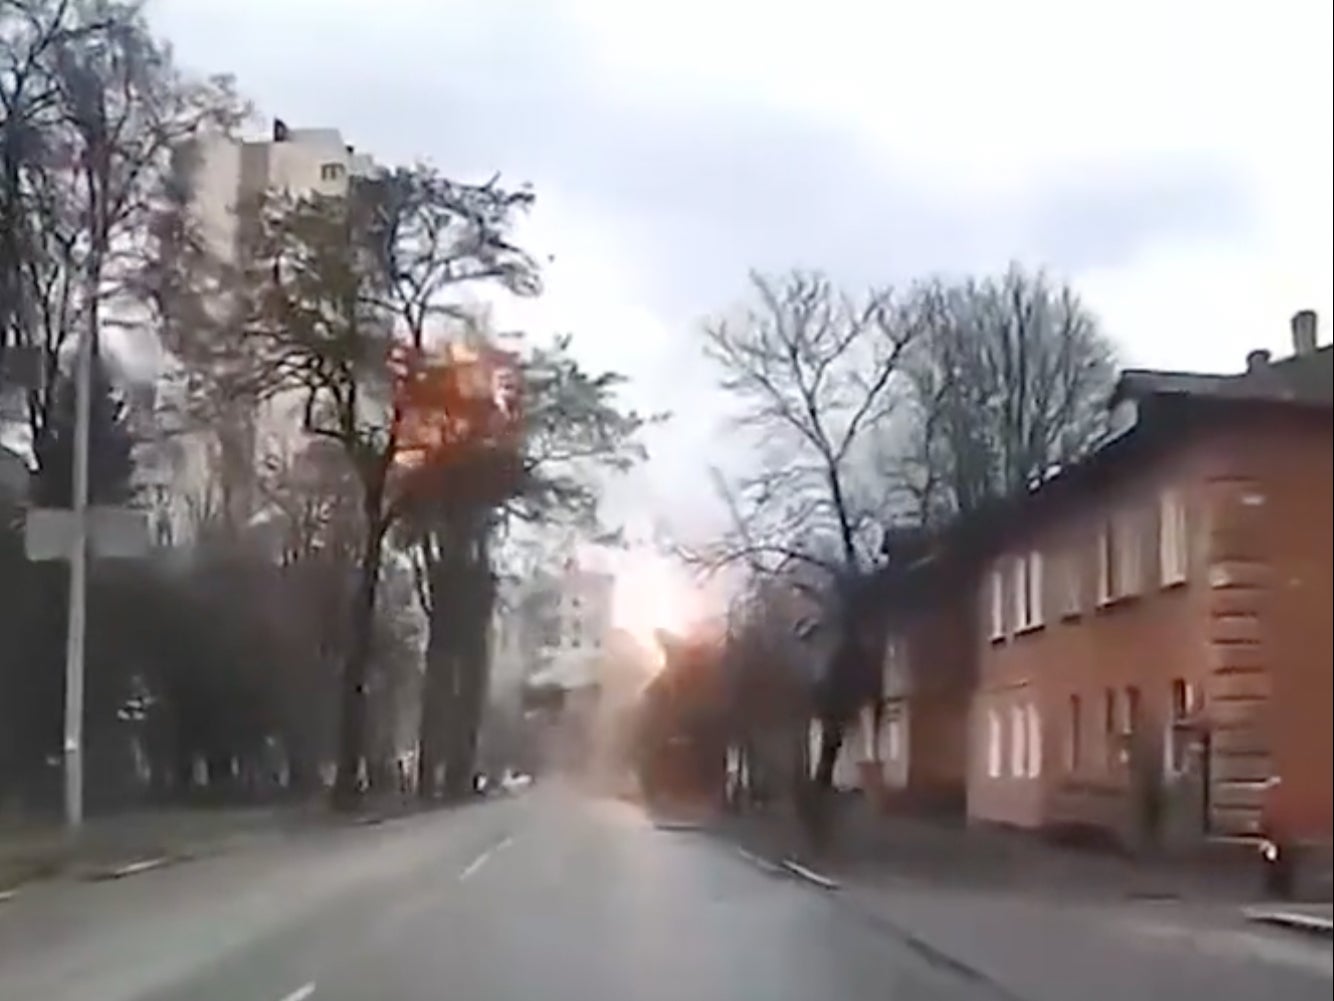 The moment the missiles fired by Russian troops hit the apartment complex